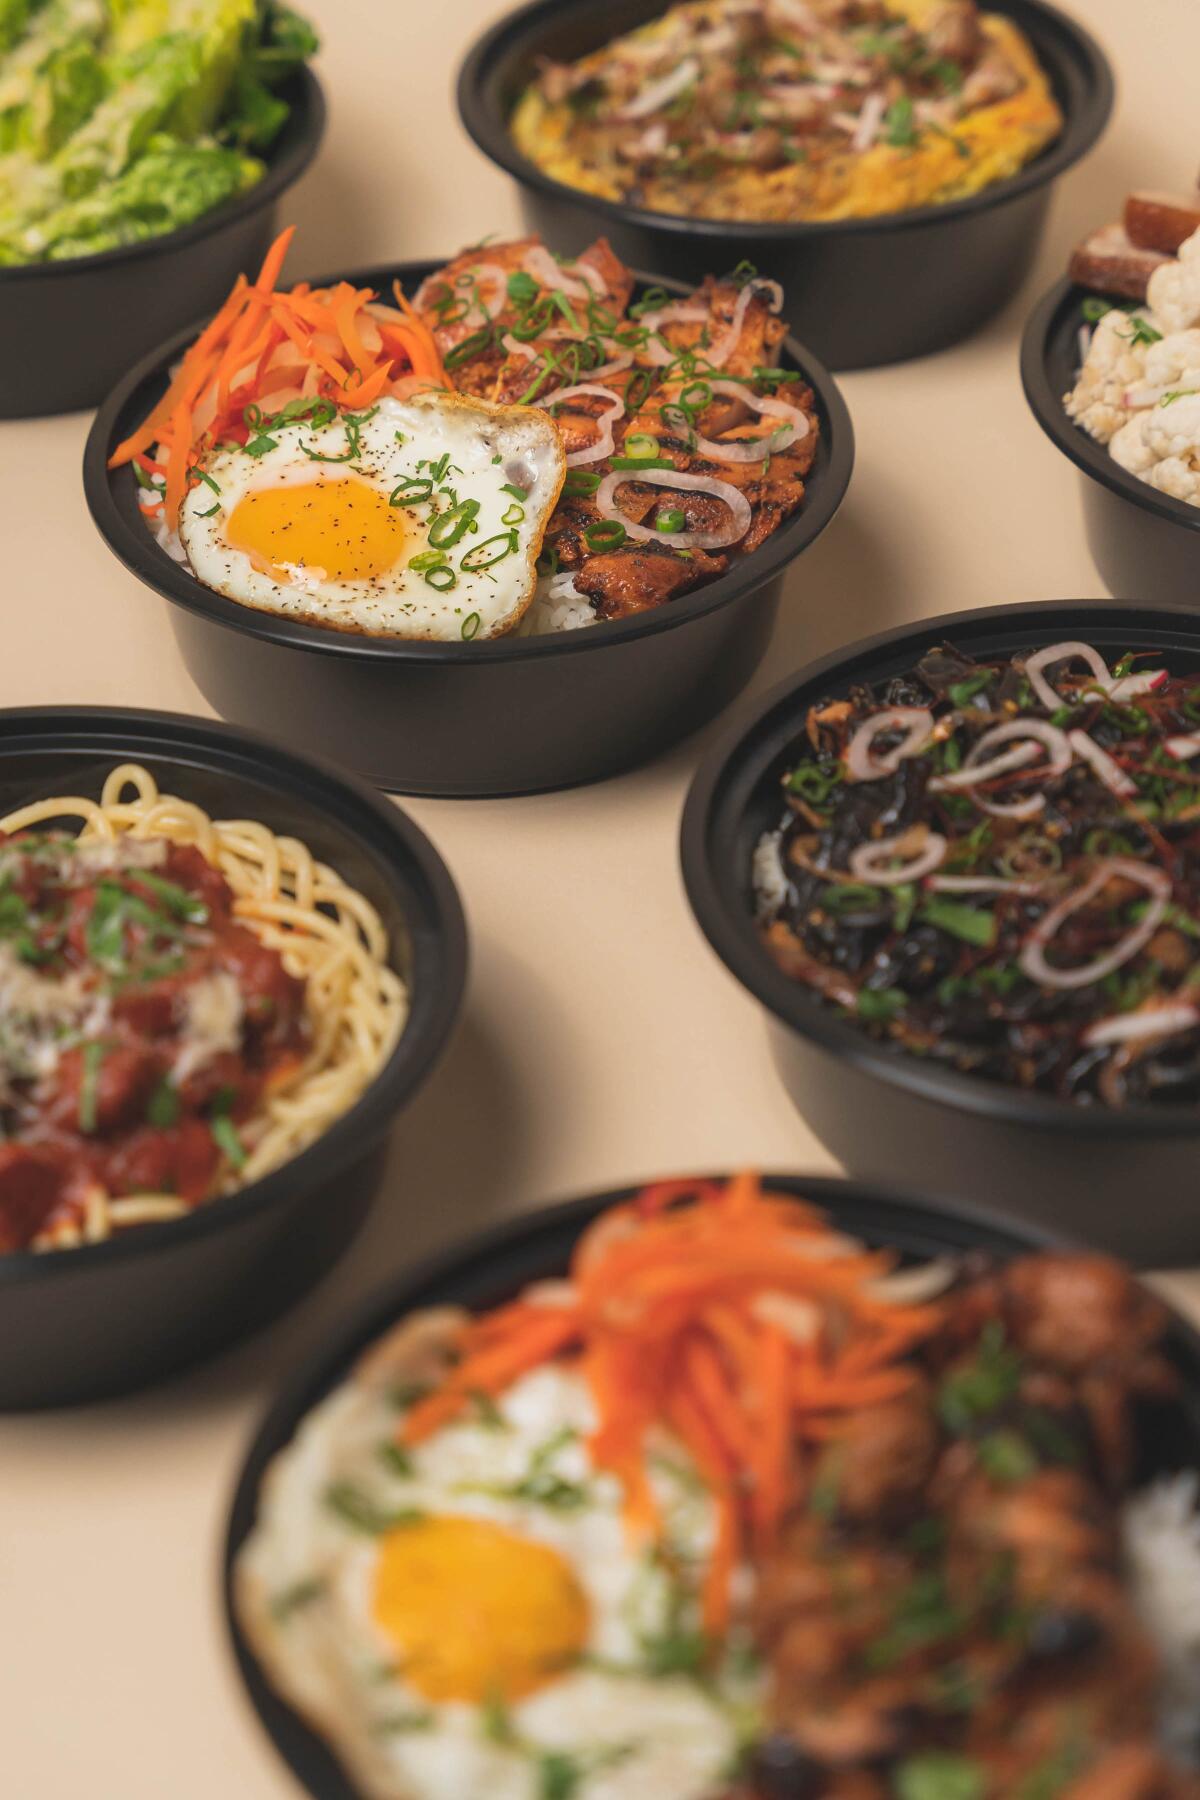 Rice Bowls from White Rice Morena.